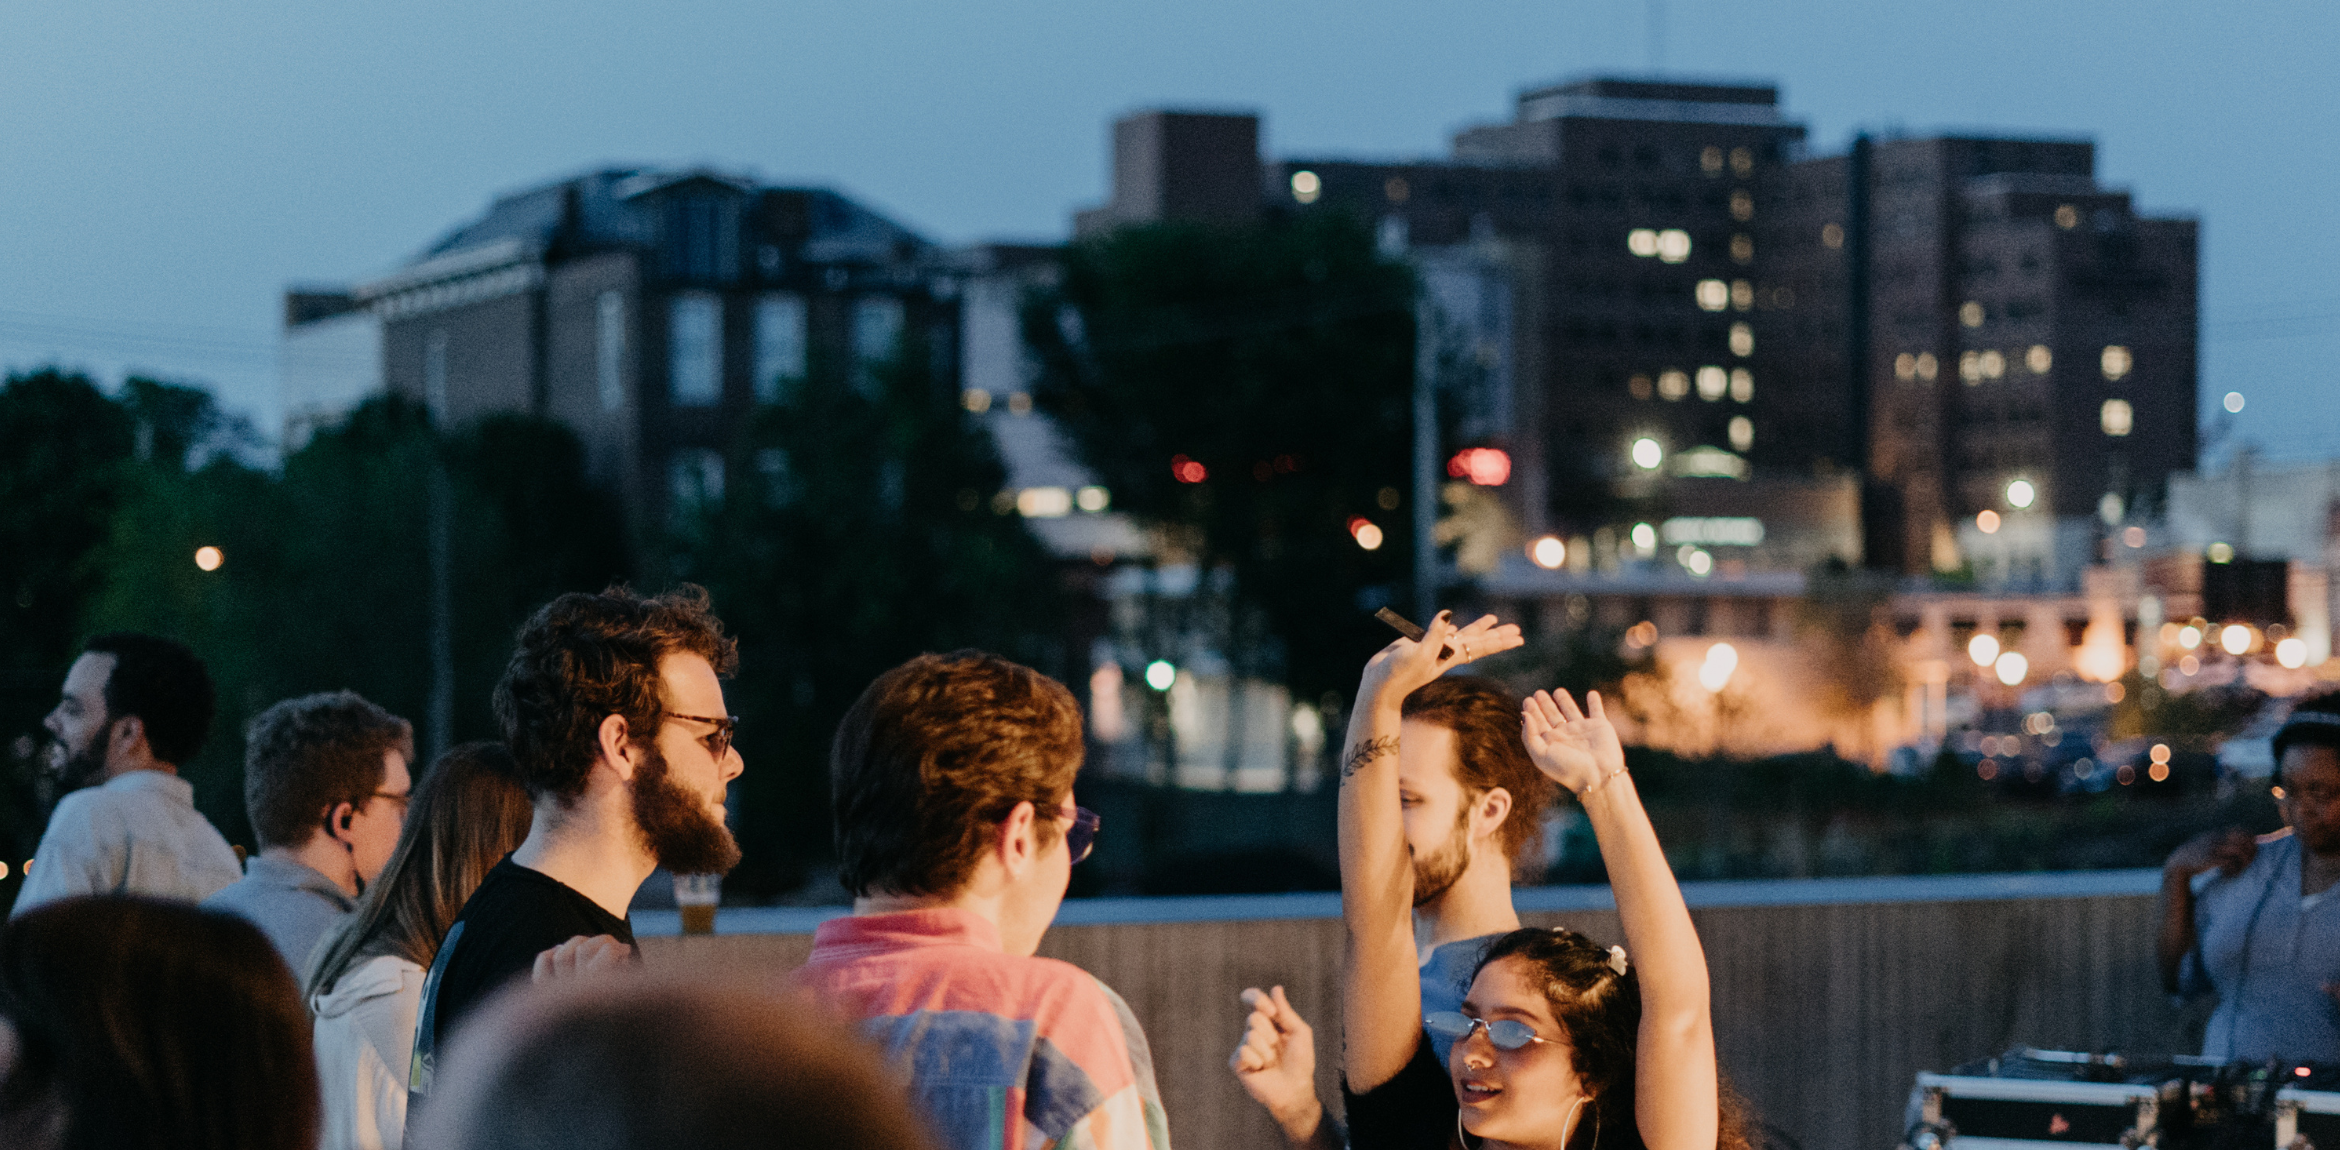 A group of people are dancing outdoors in the evening, with a cityscape in the background. Some individuals have their hands in the air, enjoying the moment. The scene includes a mix of people socializing and dancing, illuminated by the soft evening light. The background features buildings with lit windows, indicating a lively urban setting.